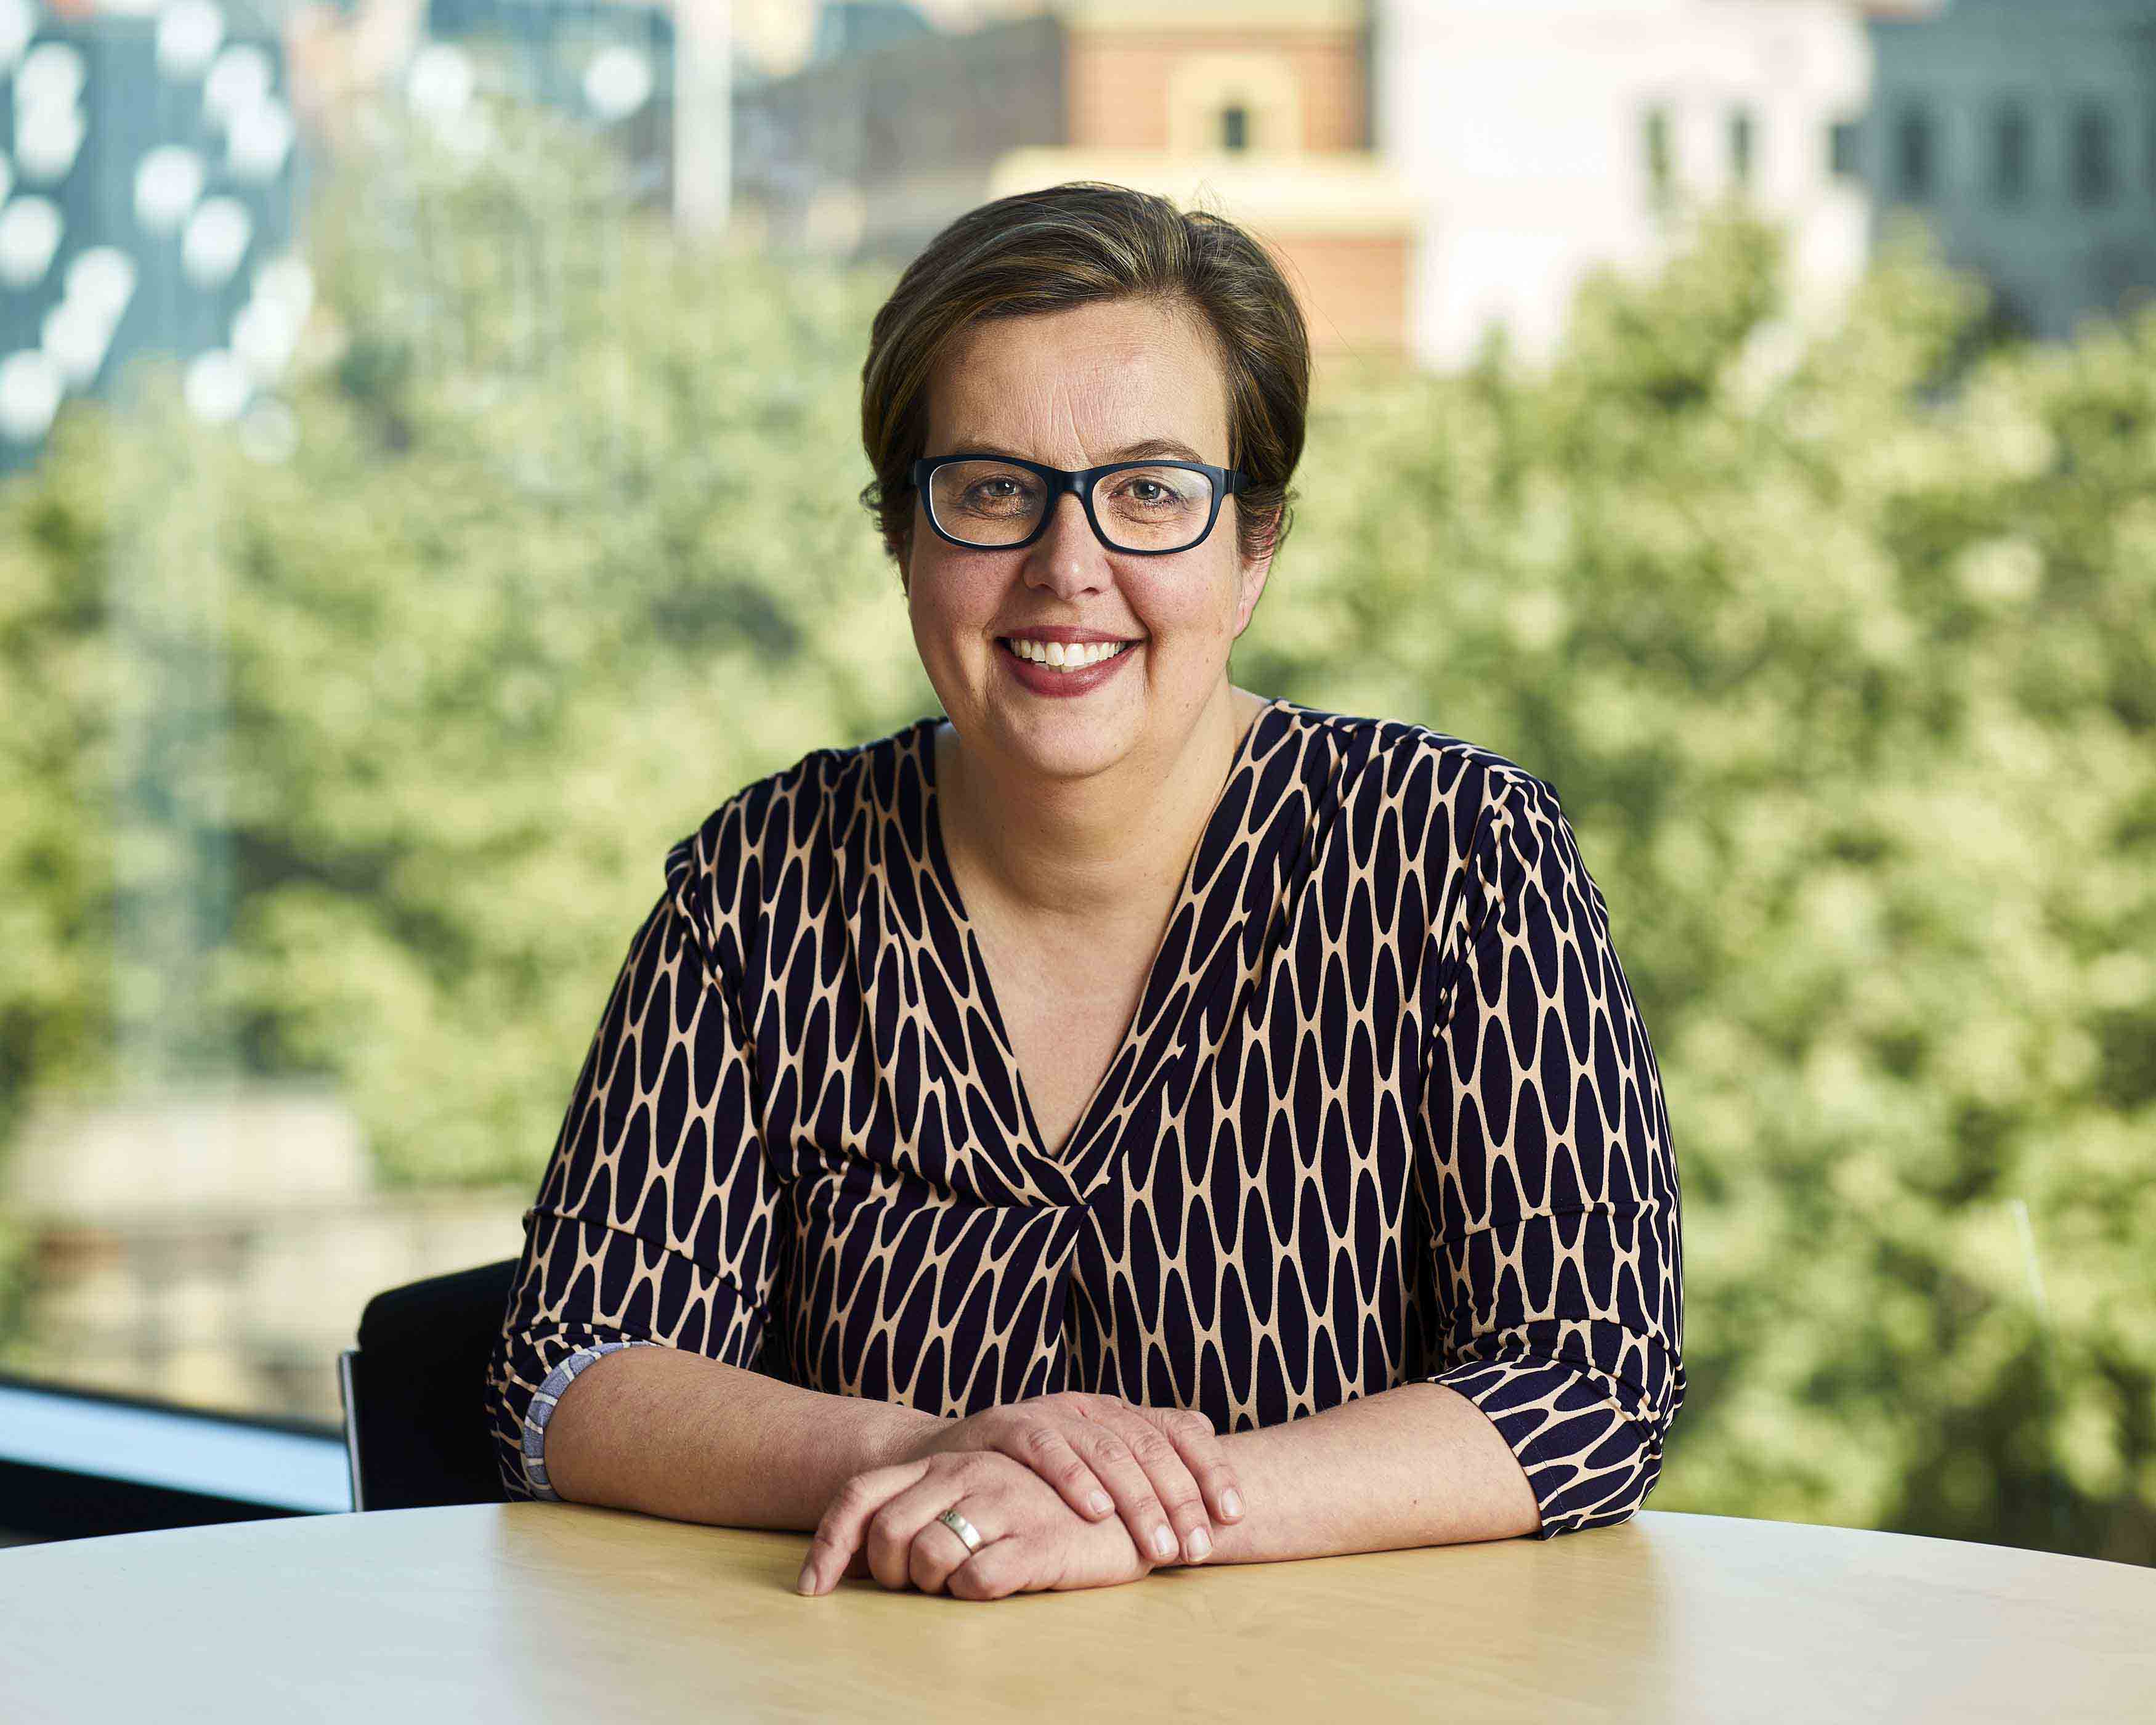 Image shows Acting Public Transport Ombudsman, Ann Jorgensen. Ann is a Caucasian woman with short-length brown hair. She is wearing a black and tan patterned dress and dark framed glasses. She is sitting at a table and looking directly at the camera. The blurred background shows trees and building in the Melbourne CBD.